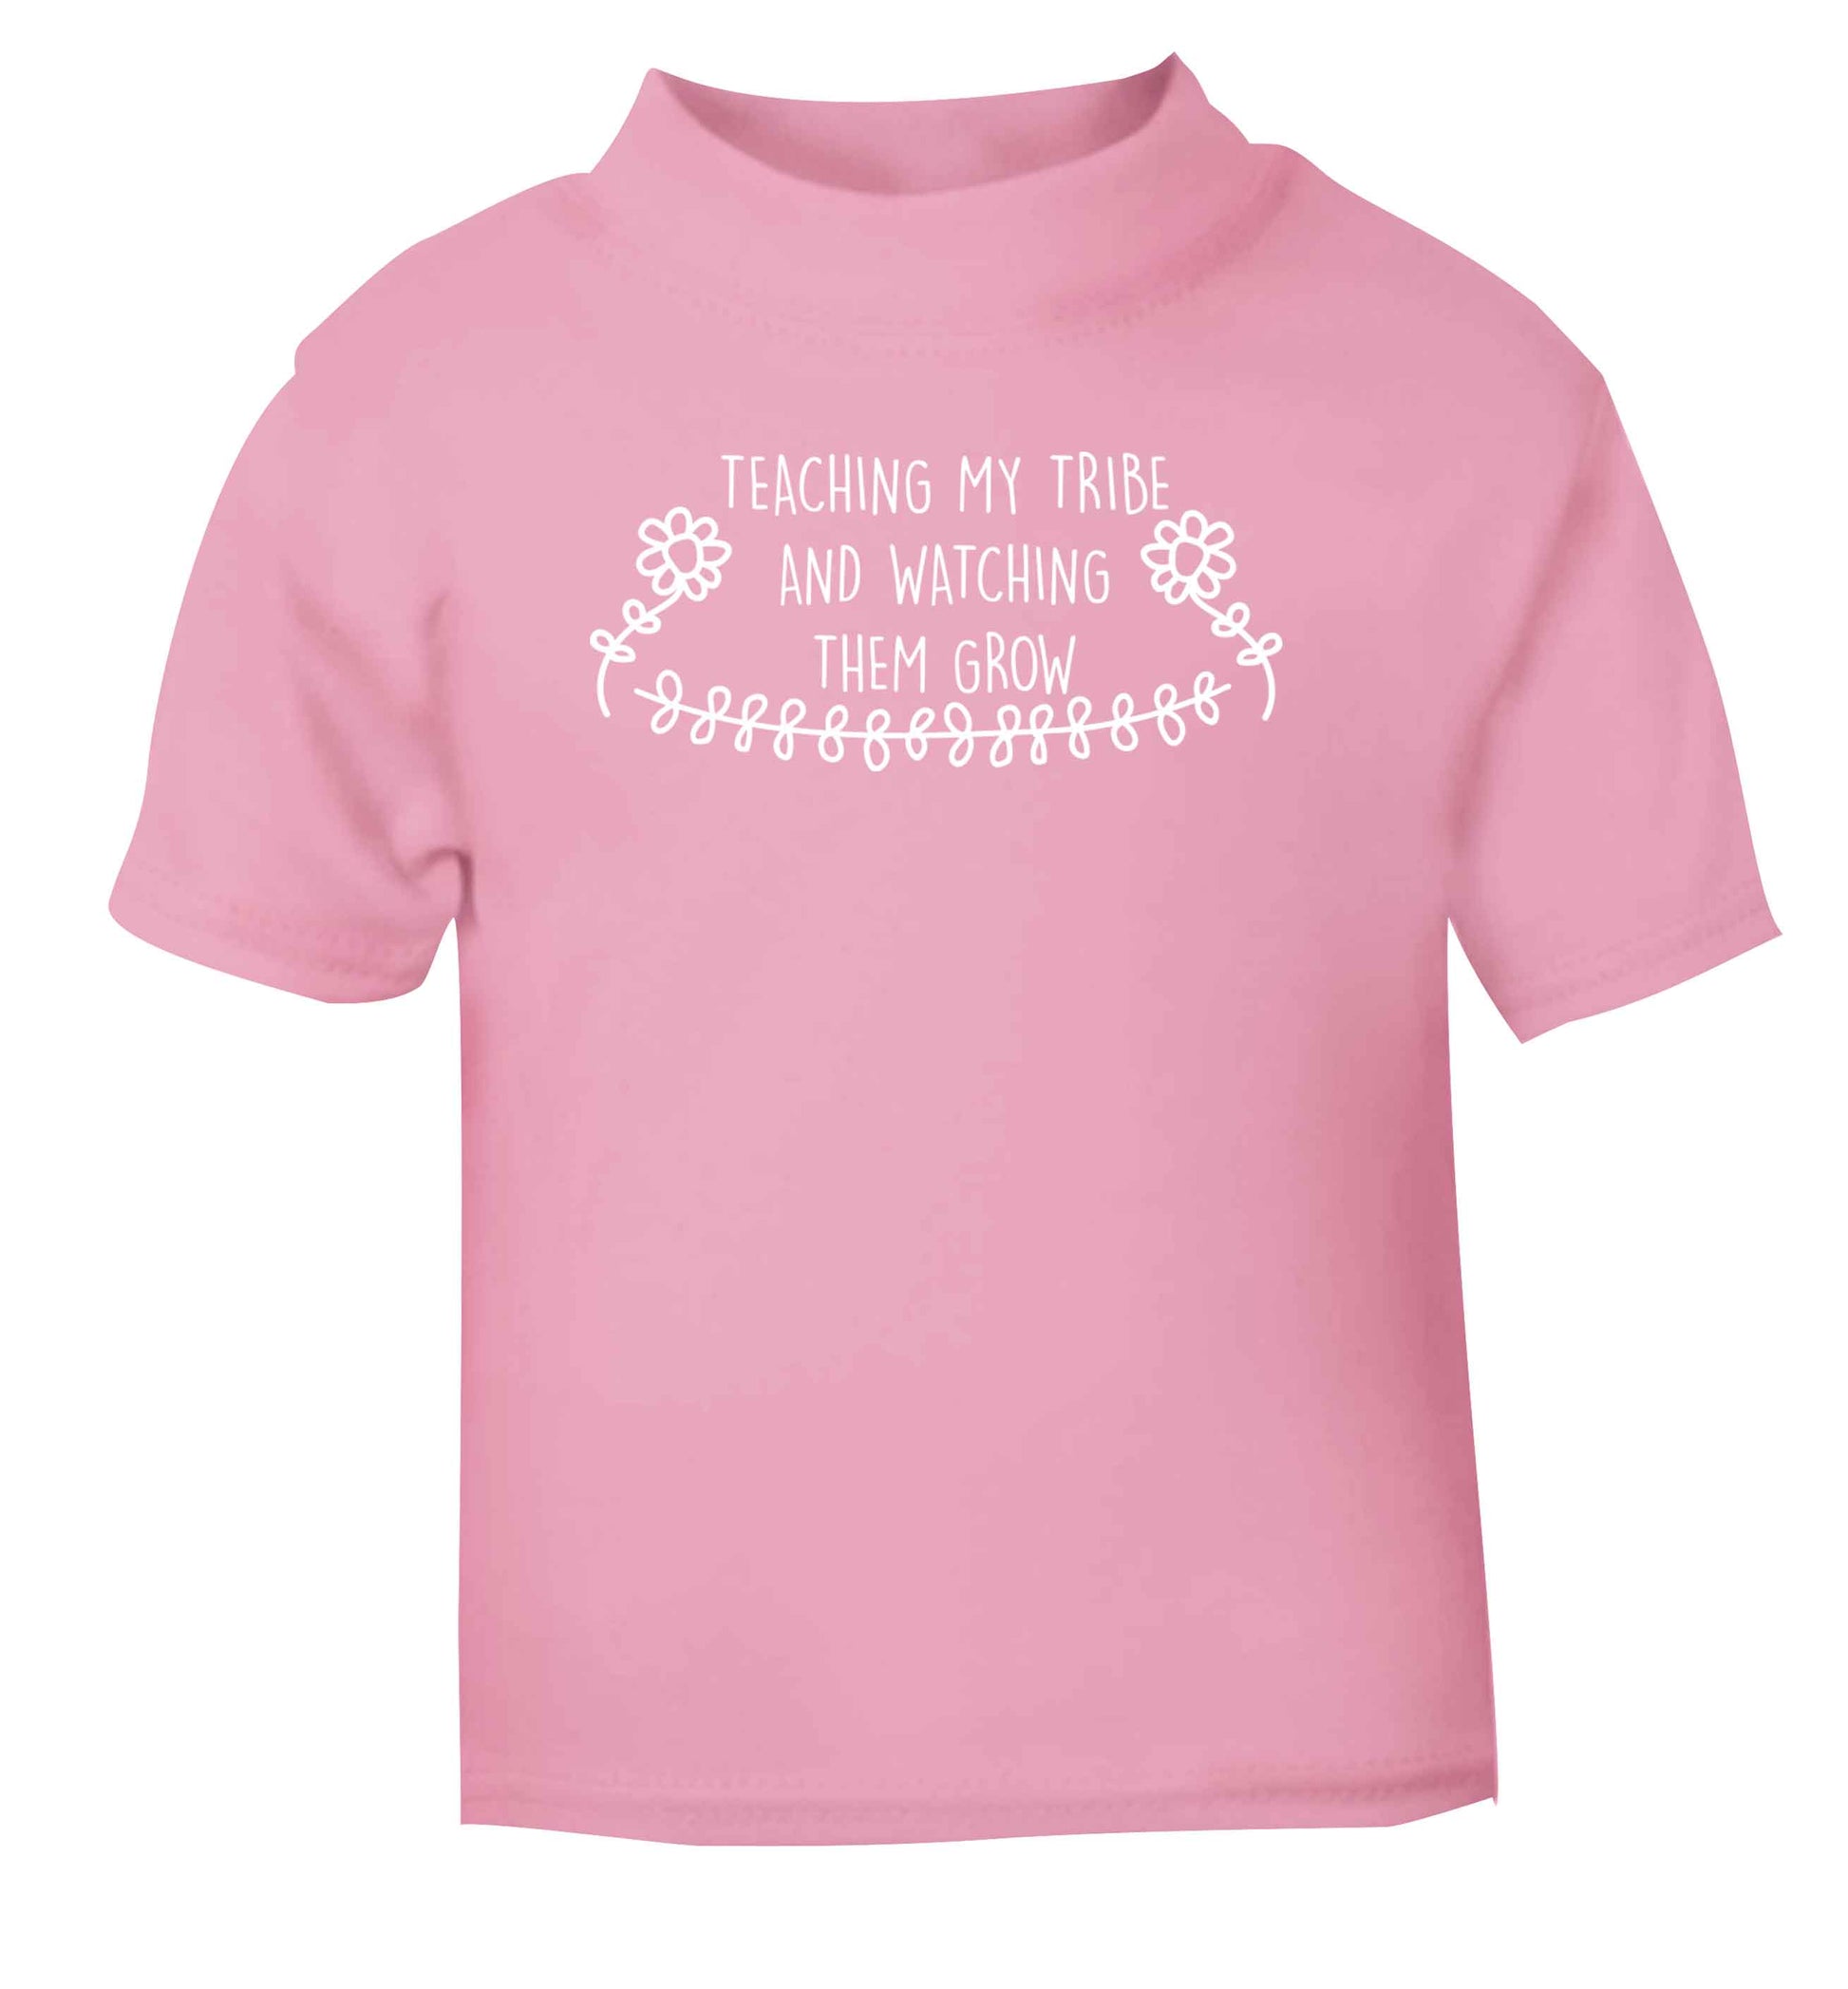 Teaching my tribe and watching them grow light pink Baby Toddler Tshirt 2 Years